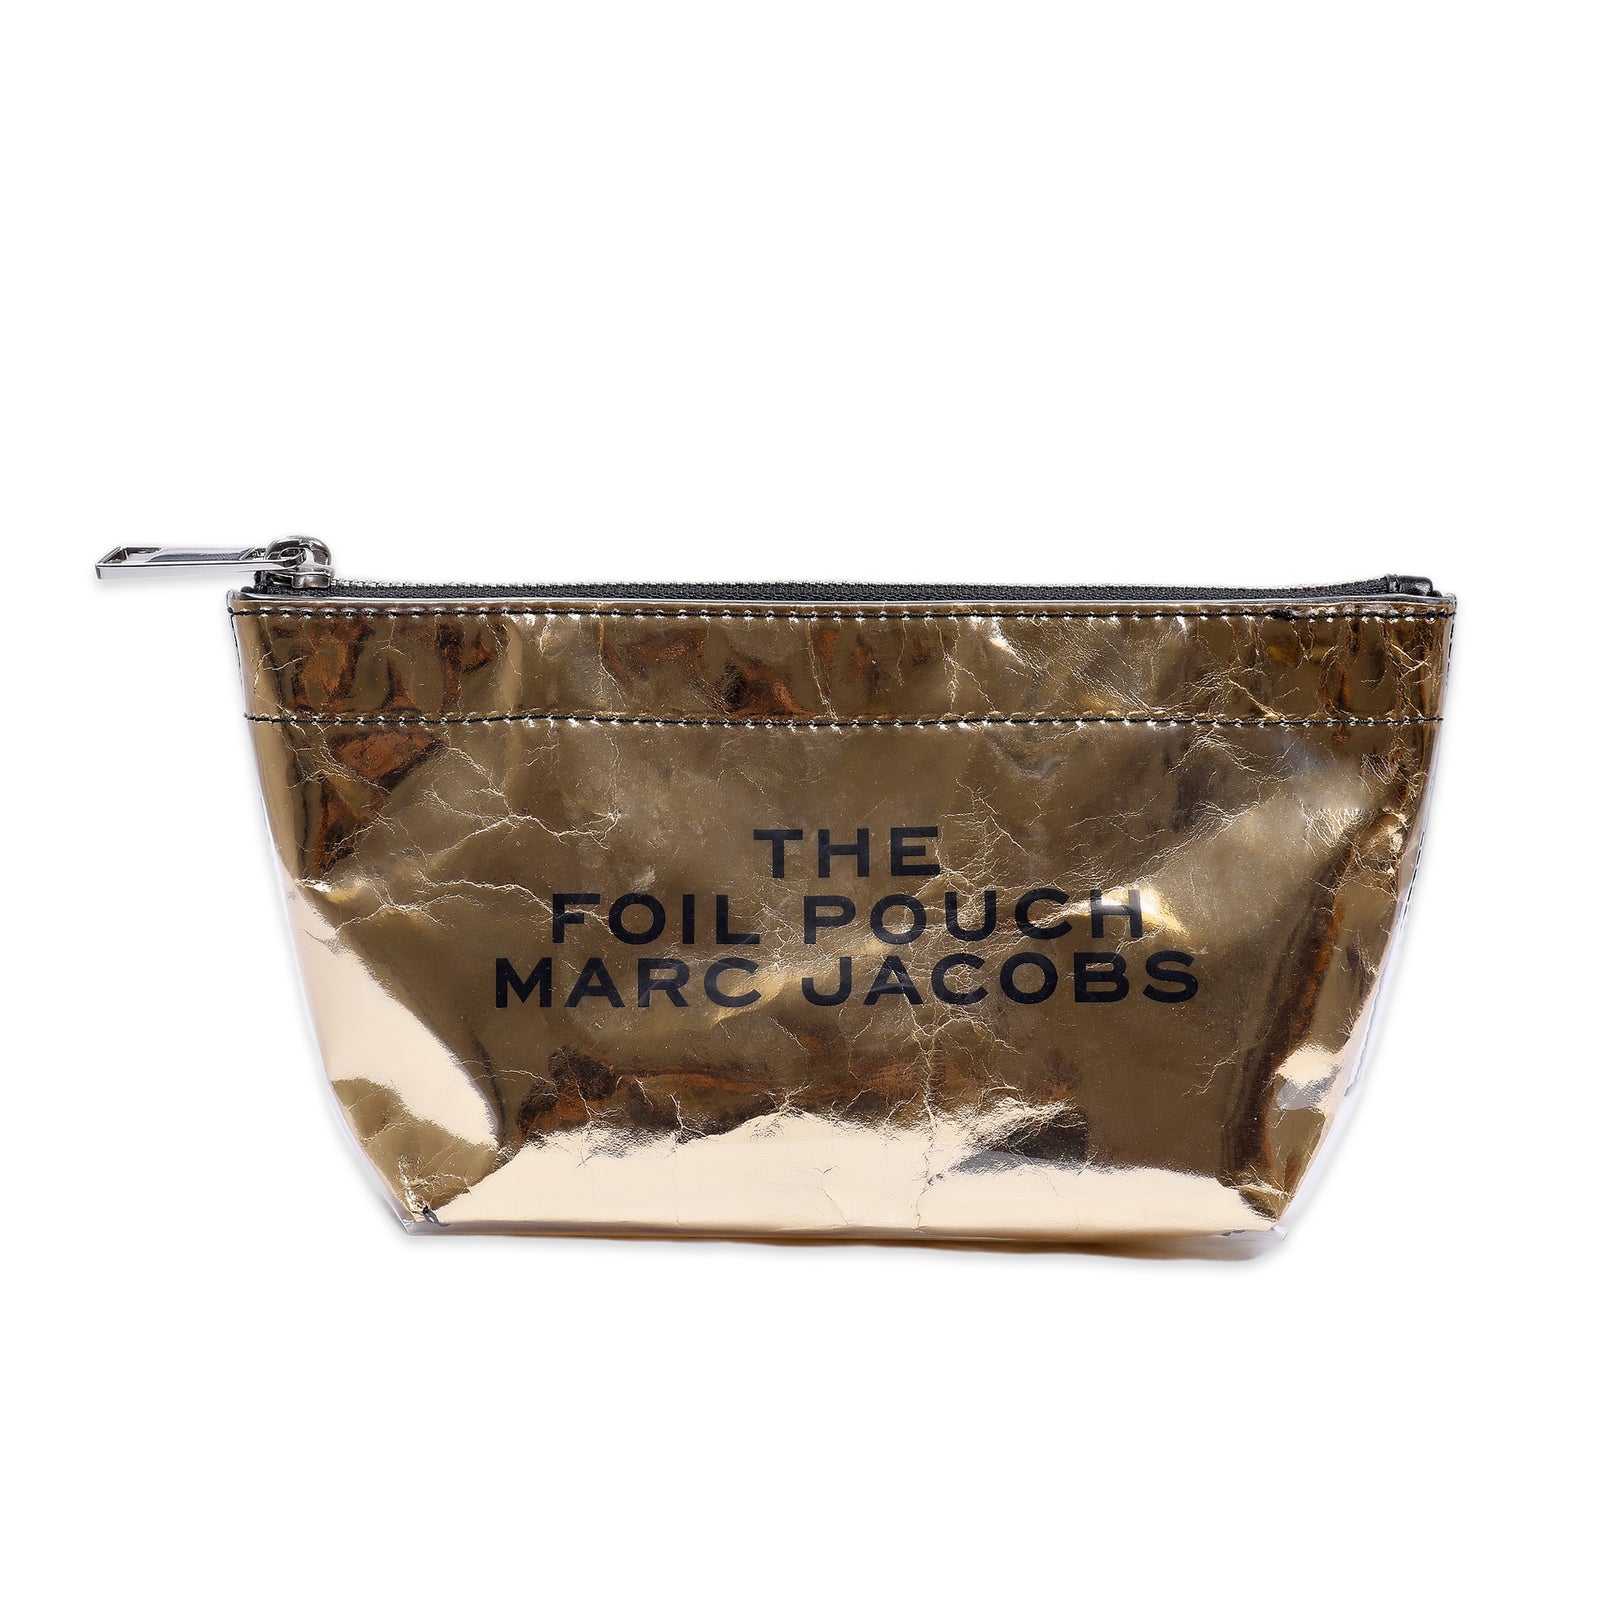 MARC JACOBS COSMETIC CASE - Yooto